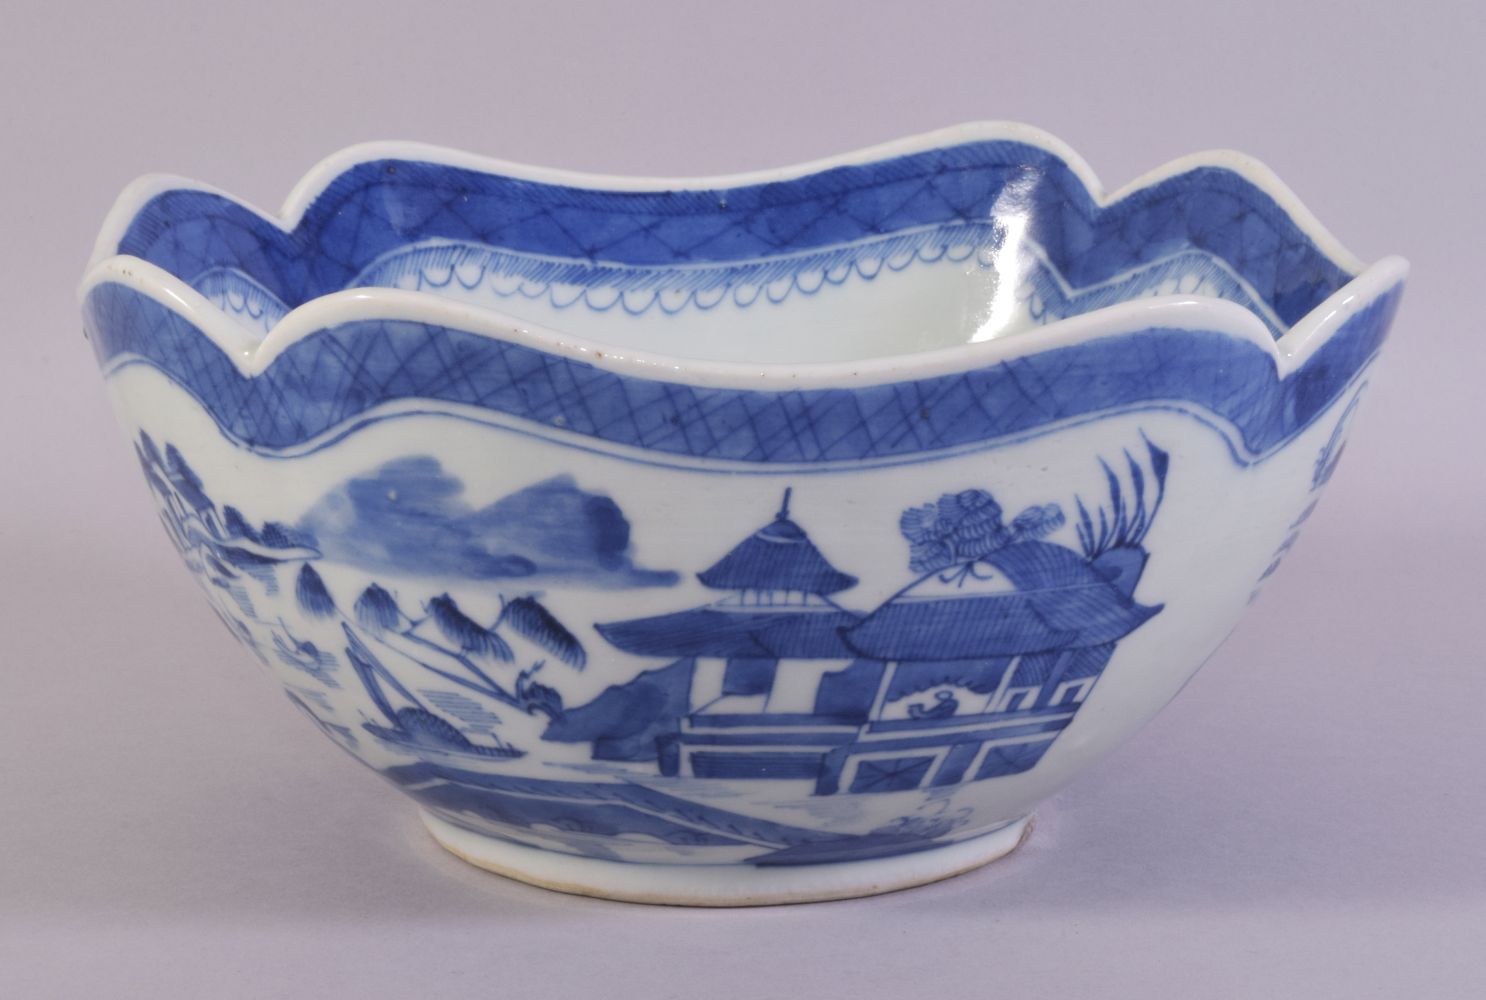 A CHINESE BLUE AND WHITE PORCELAIN BOWL, decorated with a landscape including buildings, boats and